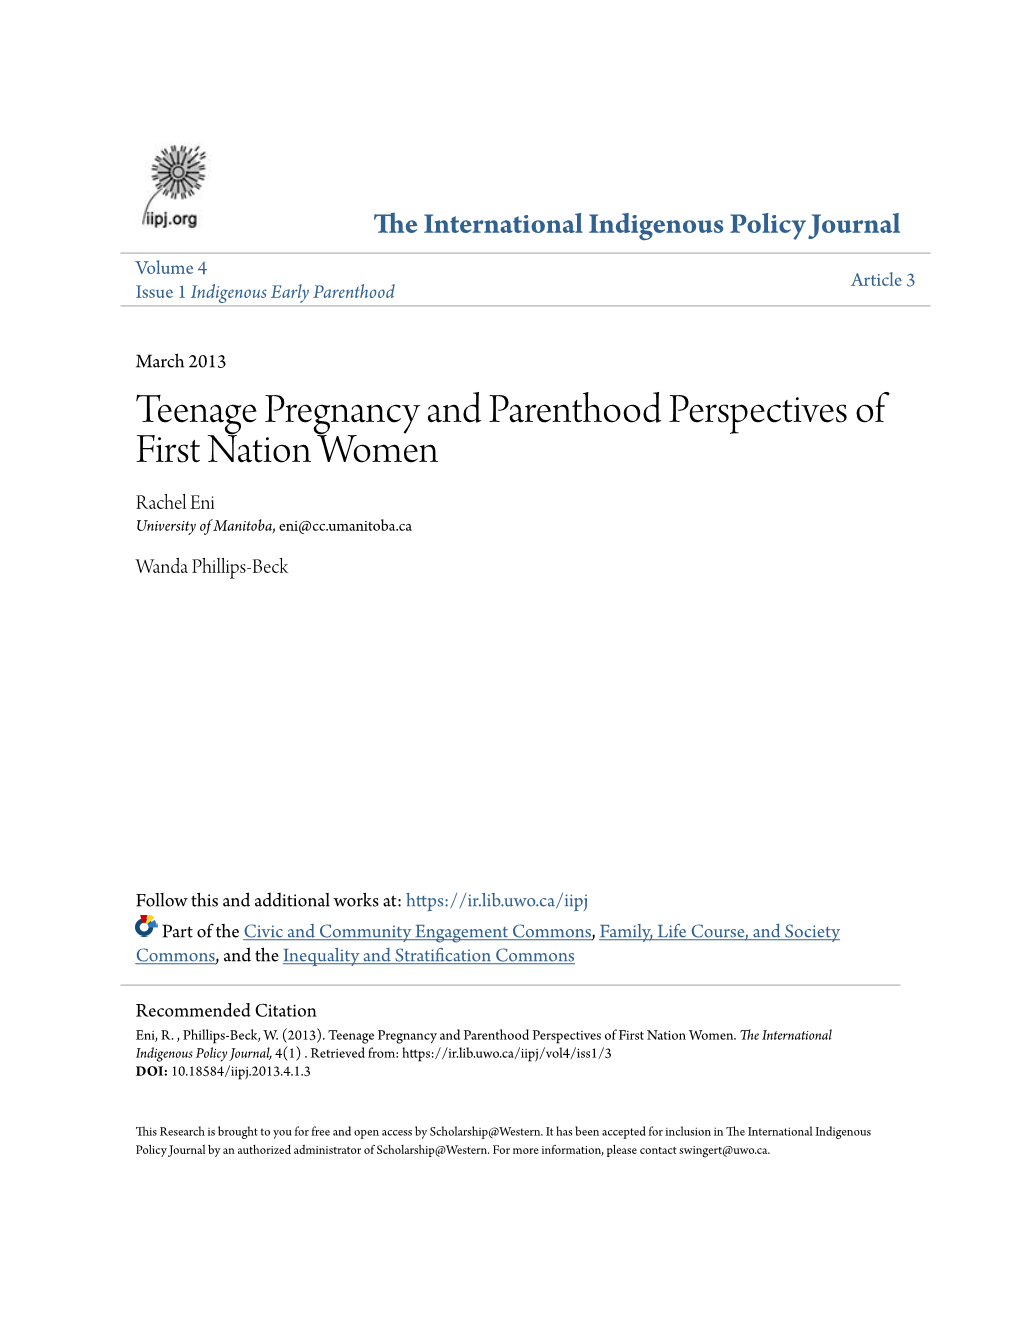 Teenage Pregnancy and Parenthood Perspectives of First Nation Women Rachel Eni University of Manitoba, Eni@Cc.Umanitoba.Ca